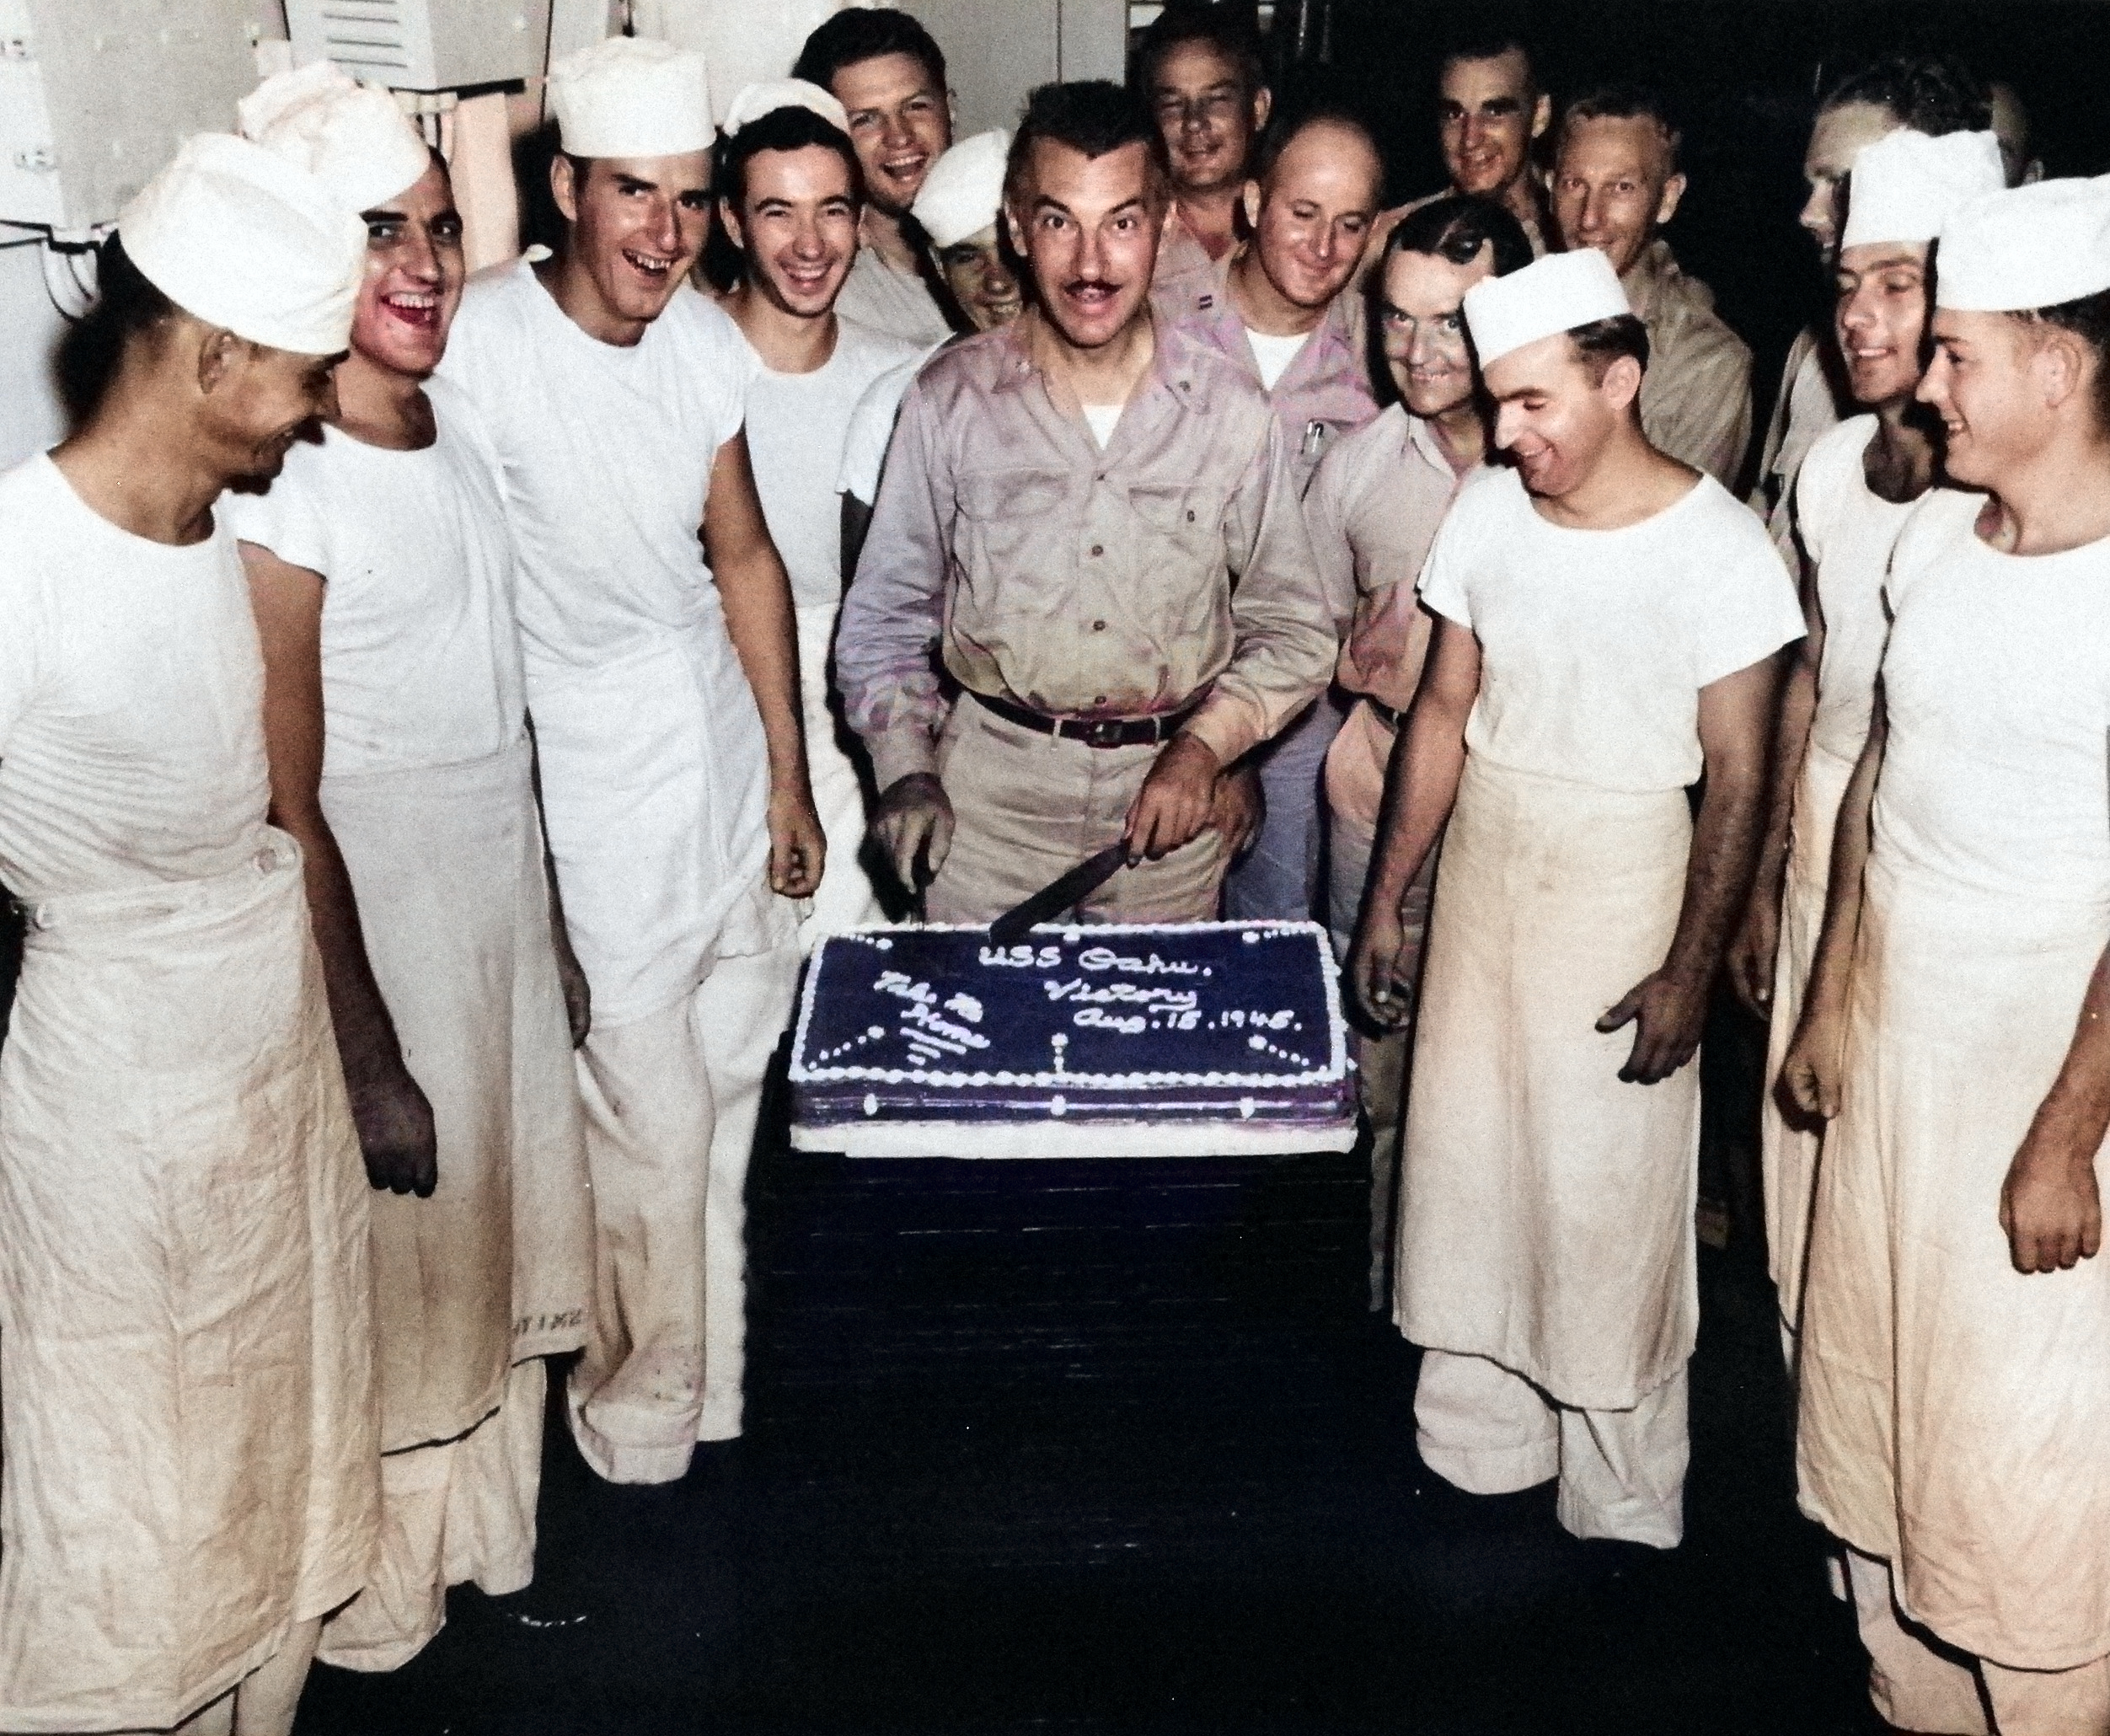 Commander A. M. Loker celebrating victory with cake aboard USS Oahu while at Eniwetok, Marshall Islands, 15 Aug 1945 [Colorized by WW2DB]